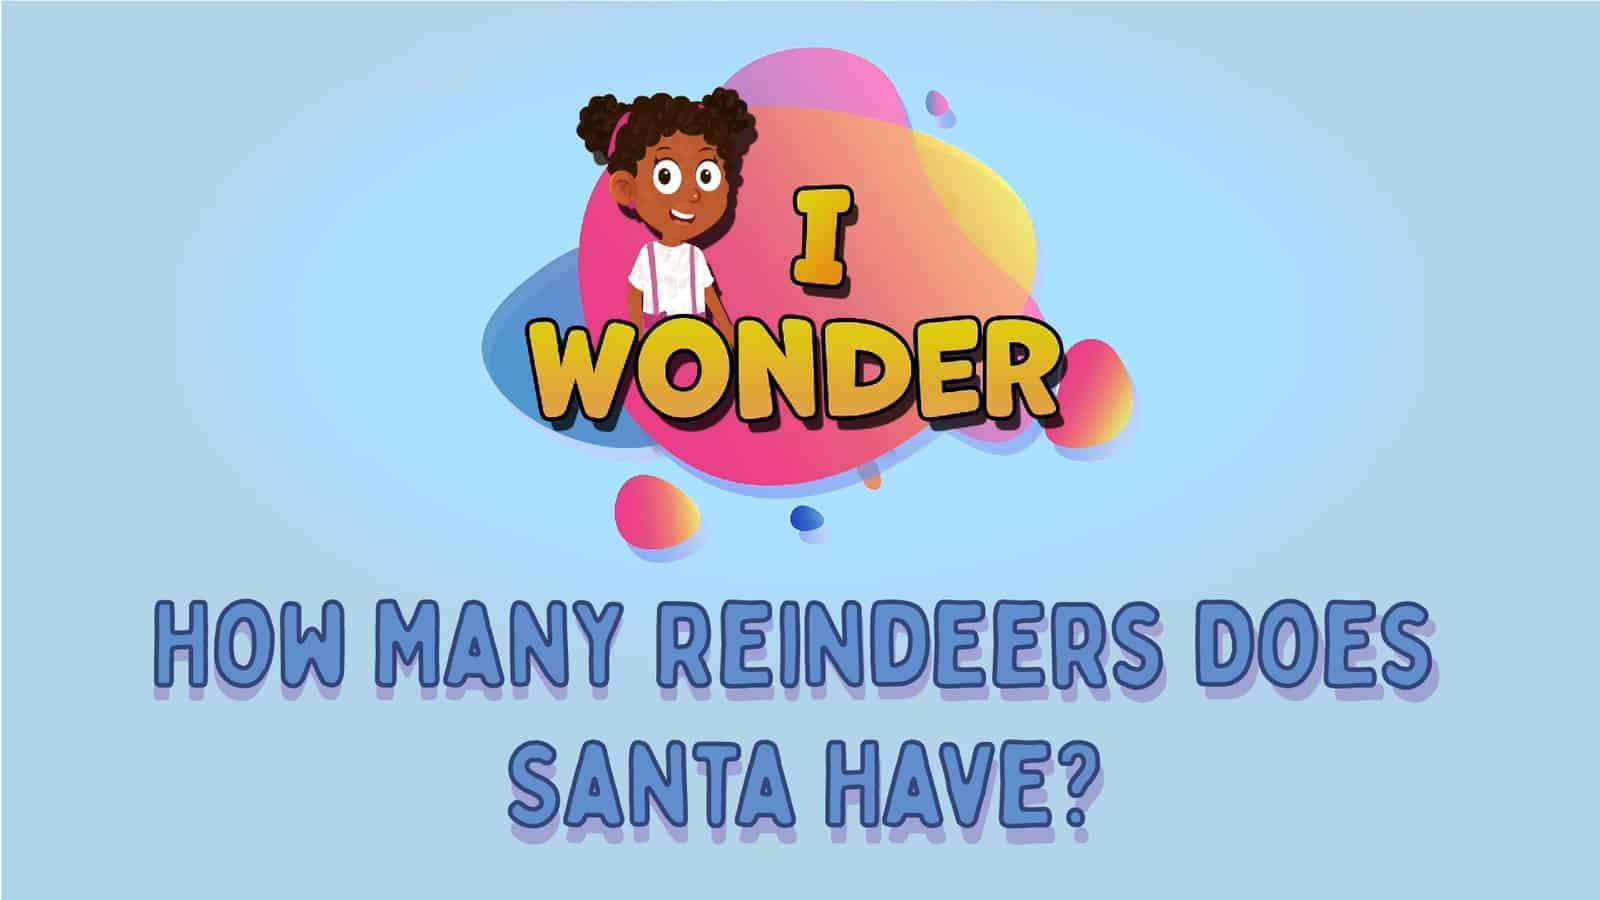 How Many Reindeers Does Santa Have?